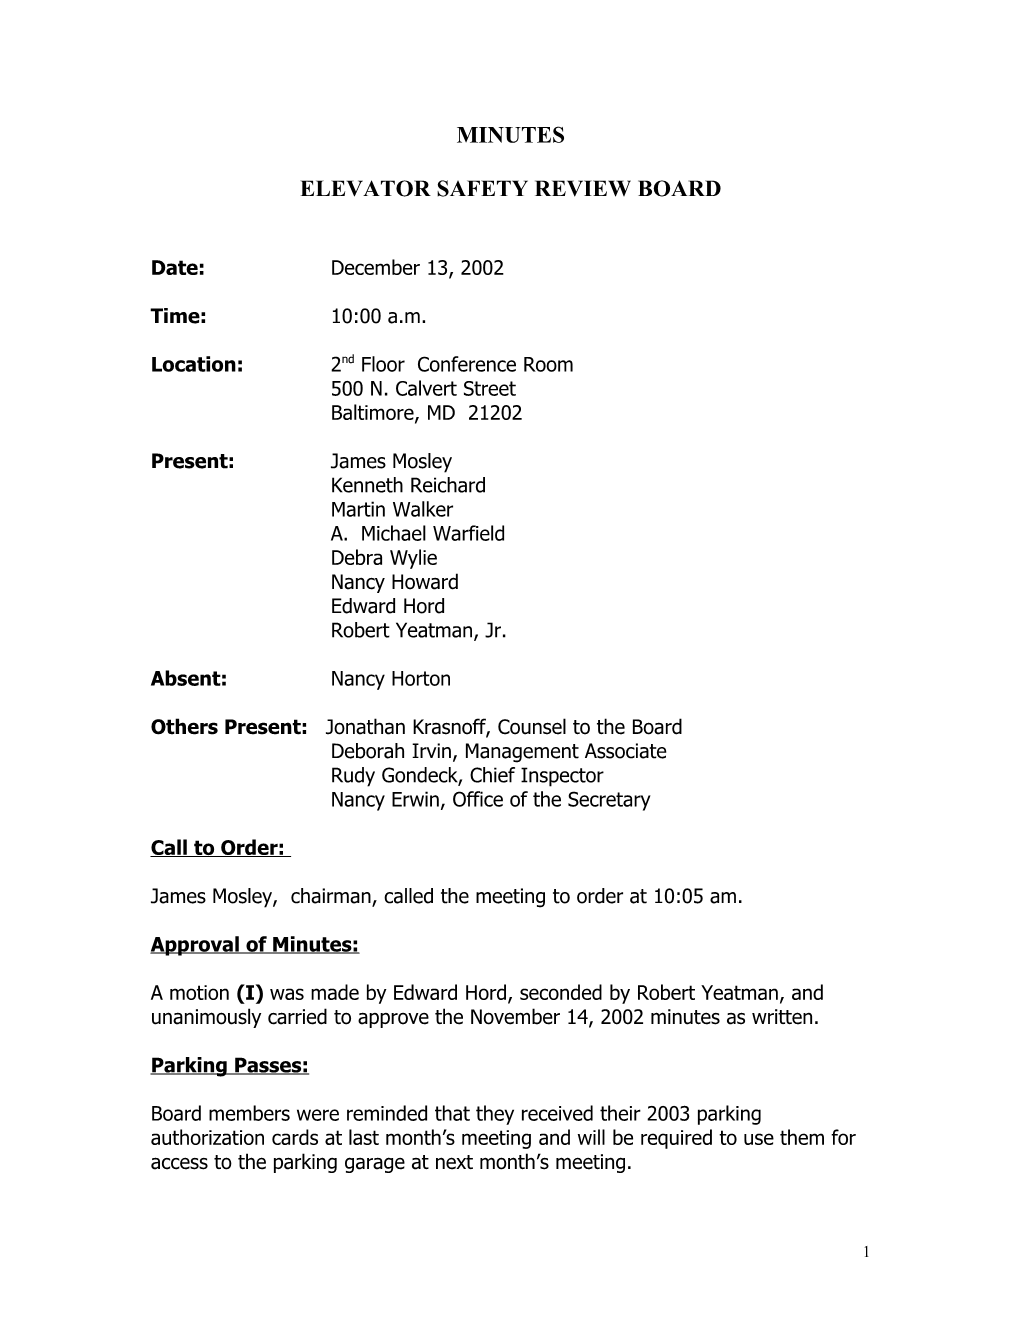 Elevator Safety Review Board